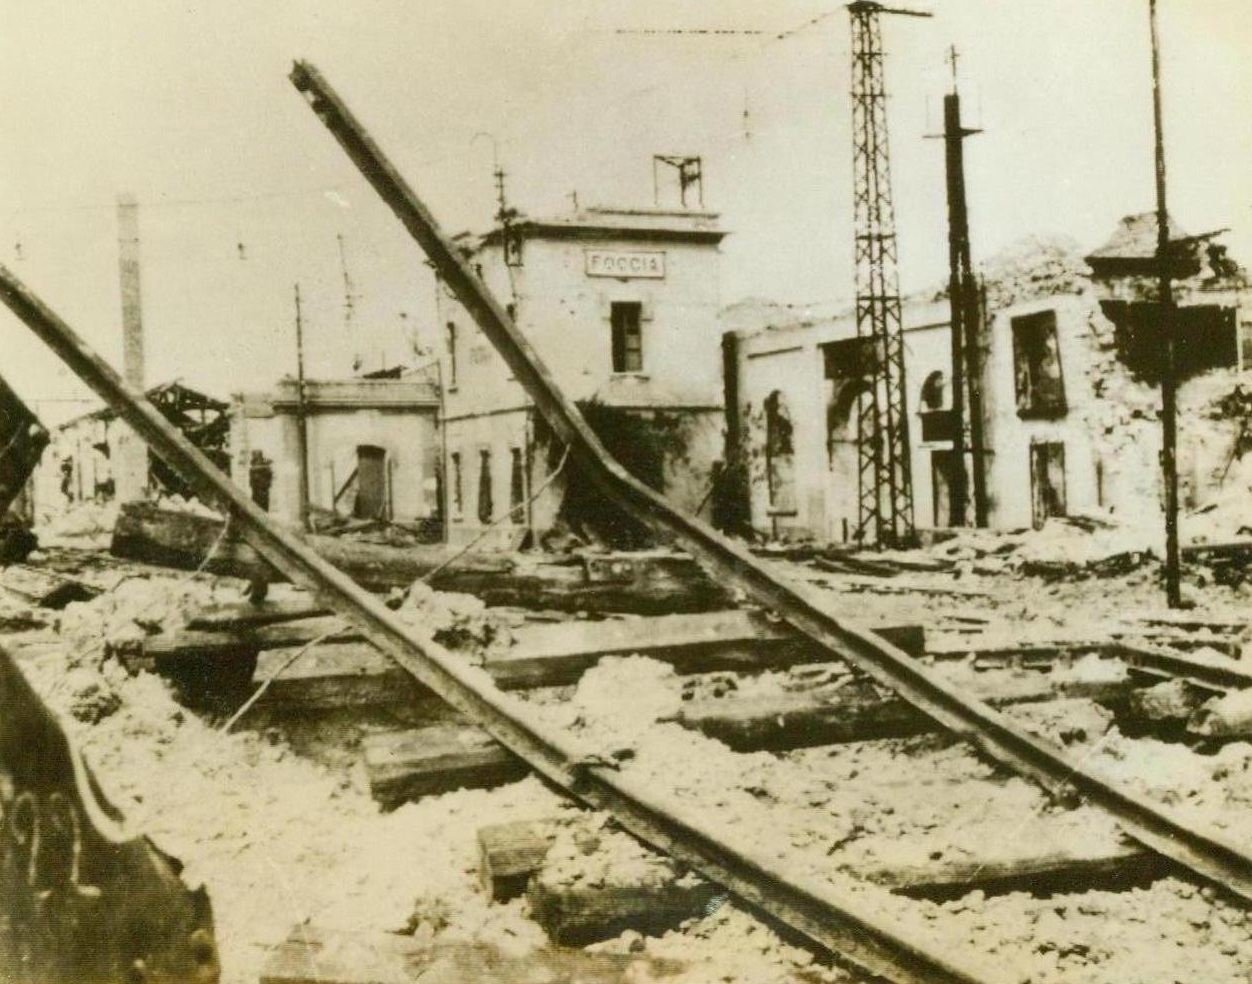 BLASTED RAILWAY YARDS AT FOGGIA. (Torn Caption) This photo flashed to New York by Radio… shows twisted rails and wreckage in … yard at Foggia, Italy, after it … by the Allies. When the city … the Germans it was a frequent … Today, British 8th … To have made a … Along the … Taken by A;